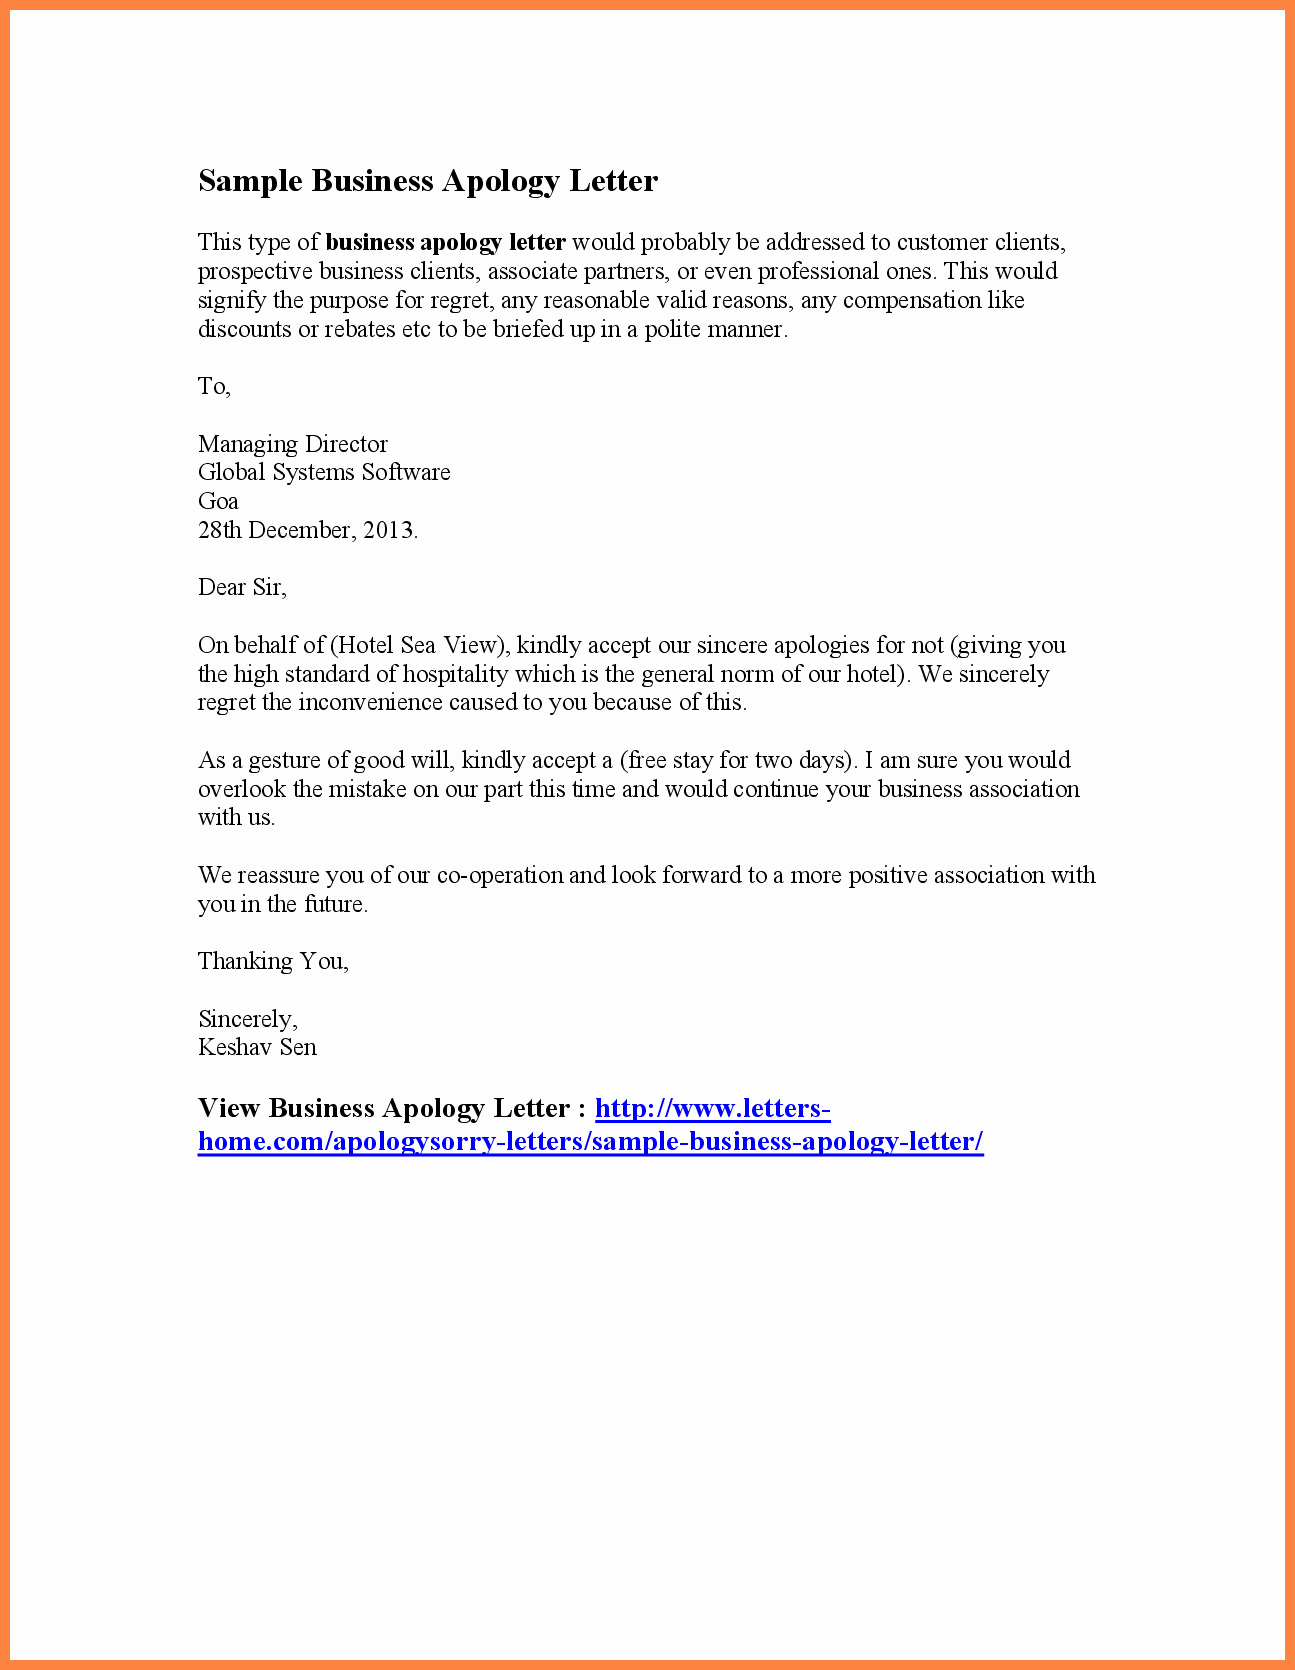 Sample Business Letters to Customers Best Of 5 Apology Letter for Not Joining Pany